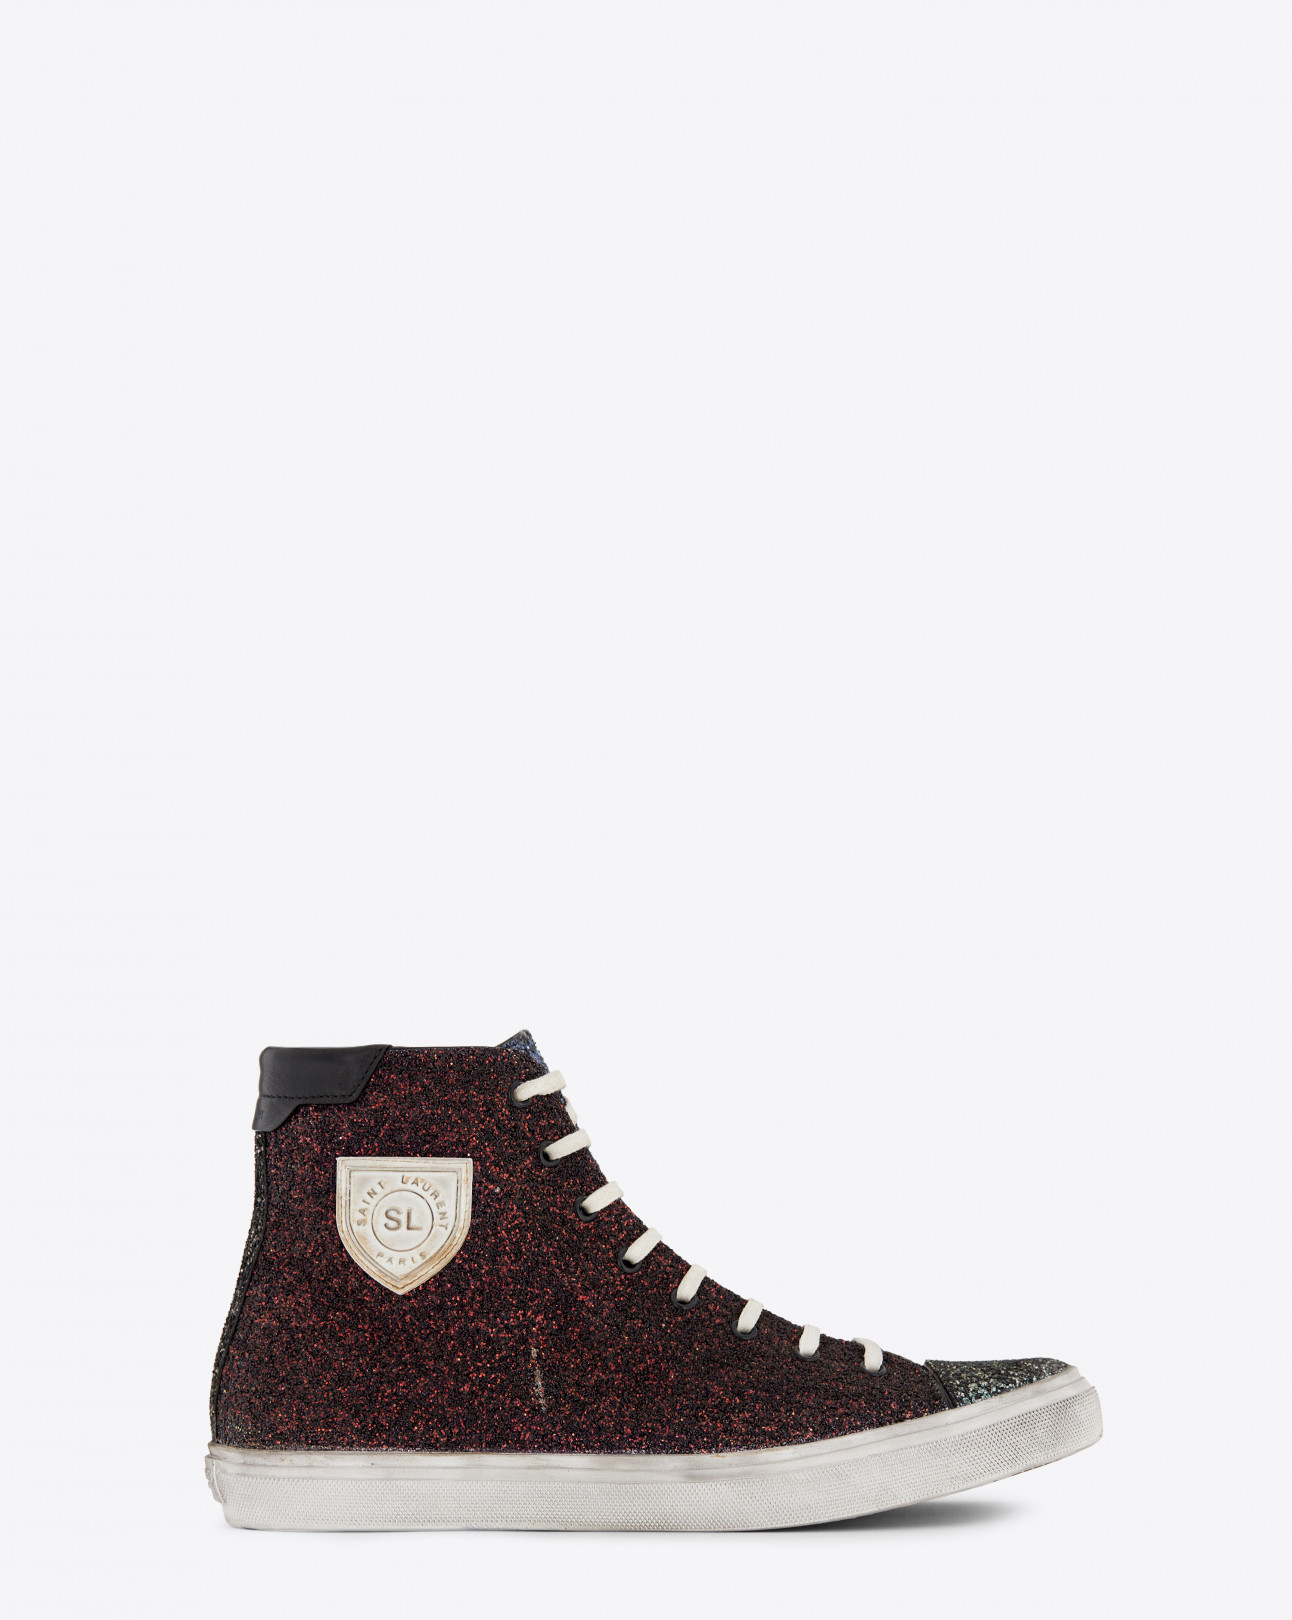 BEDFORD PATCH MID TOP SNEAKER IN MULTICOLOR GLITTER AND WHITE LEATHER （STONE WASHED）  11万円